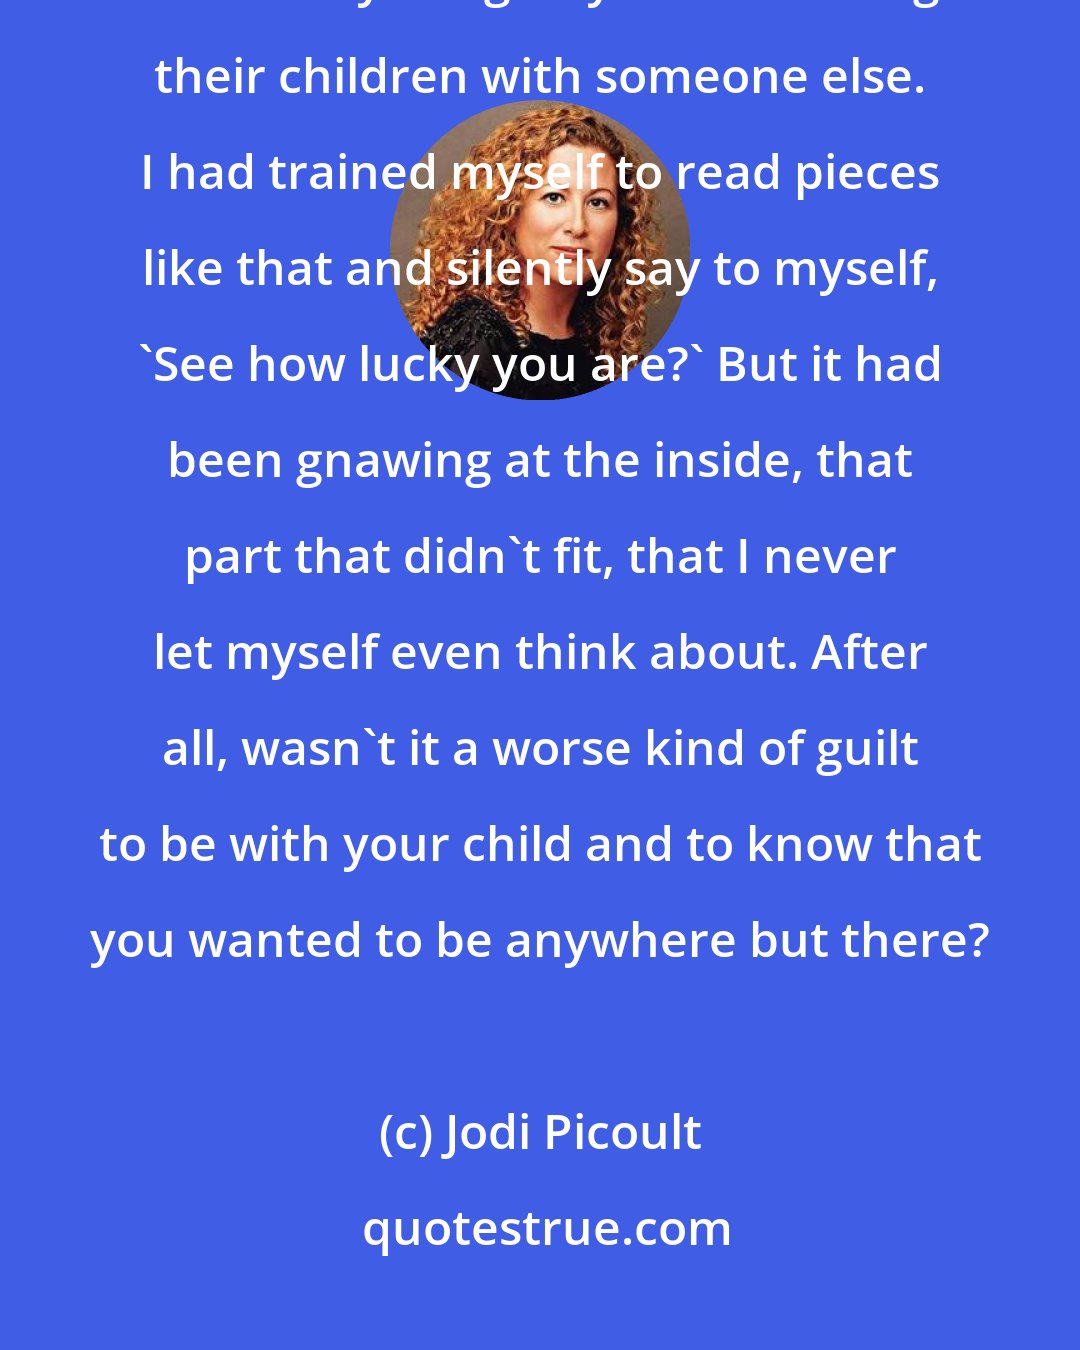 Jodi Picoult: I thought of all the magazine article I'd read on mothers who worked and constantly felt guilty about leaving their children with someone else. I had trained myself to read pieces like that and silently say to myself, 'See how lucky you are?' But it had been gnawing at the inside, that part that didn't fit, that I never let myself even think about. After all, wasn't it a worse kind of guilt to be with your child and to know that you wanted to be anywhere but there?